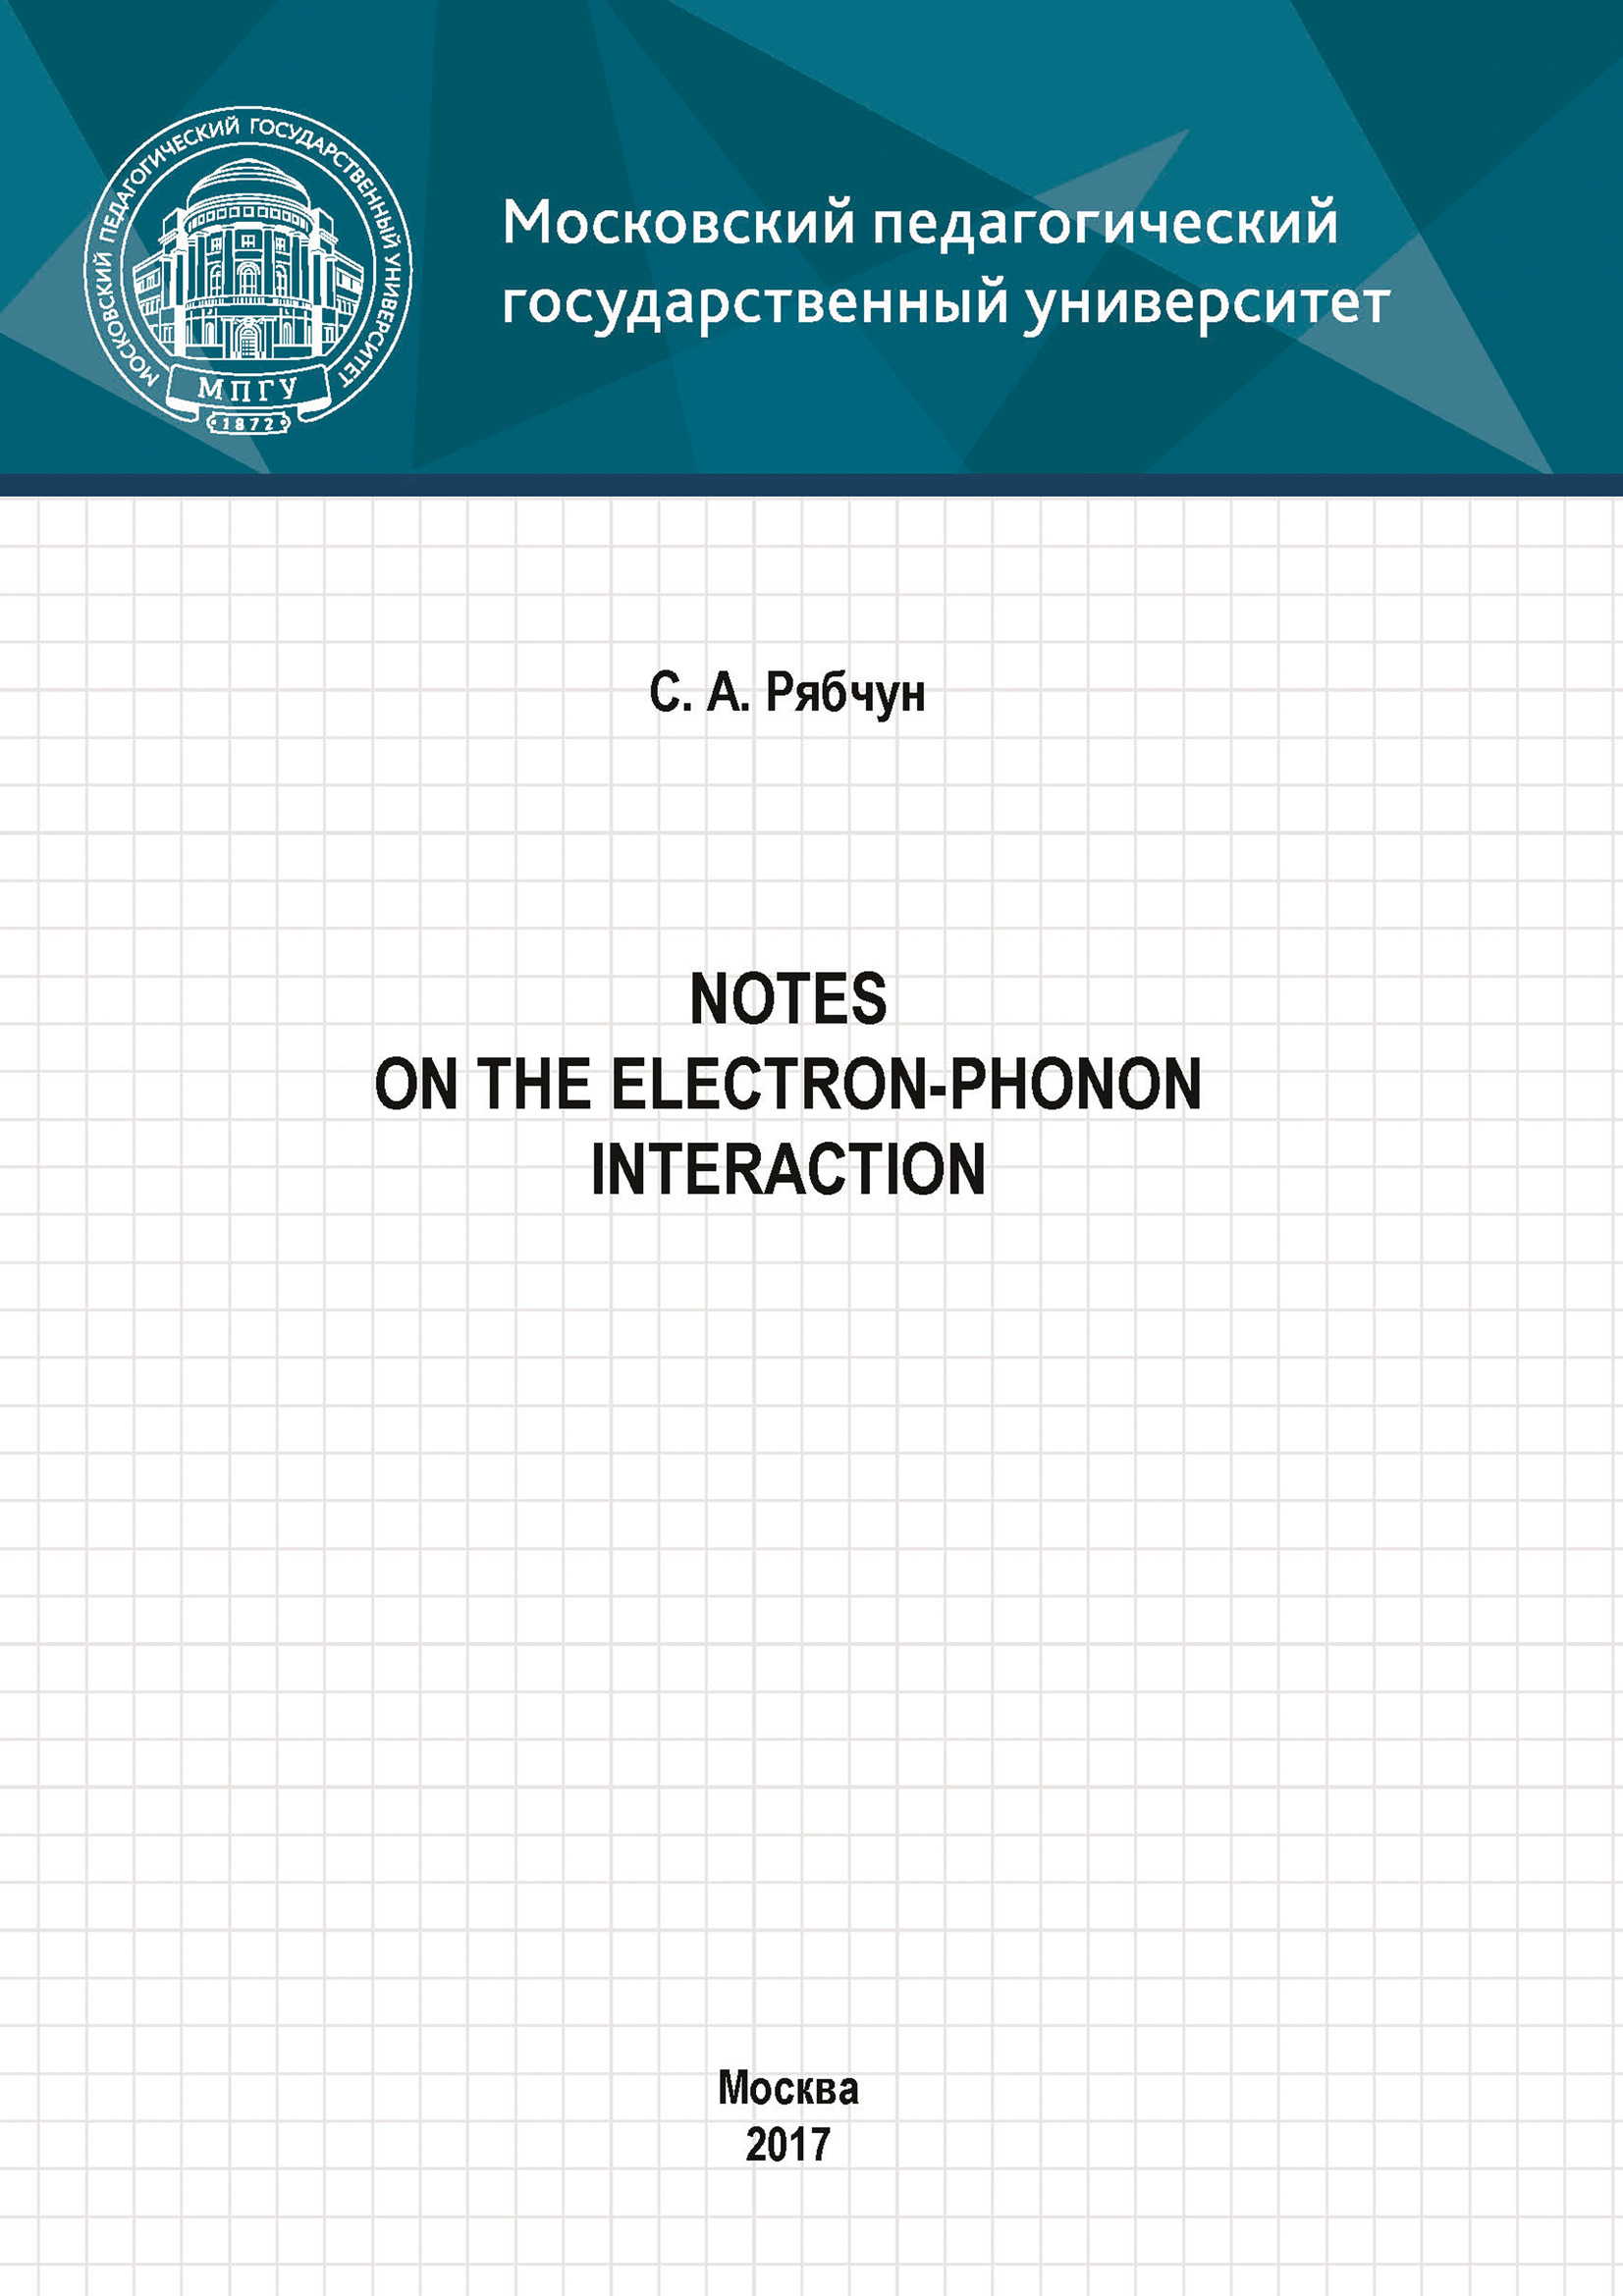 Notes on the electron-phonon interaction